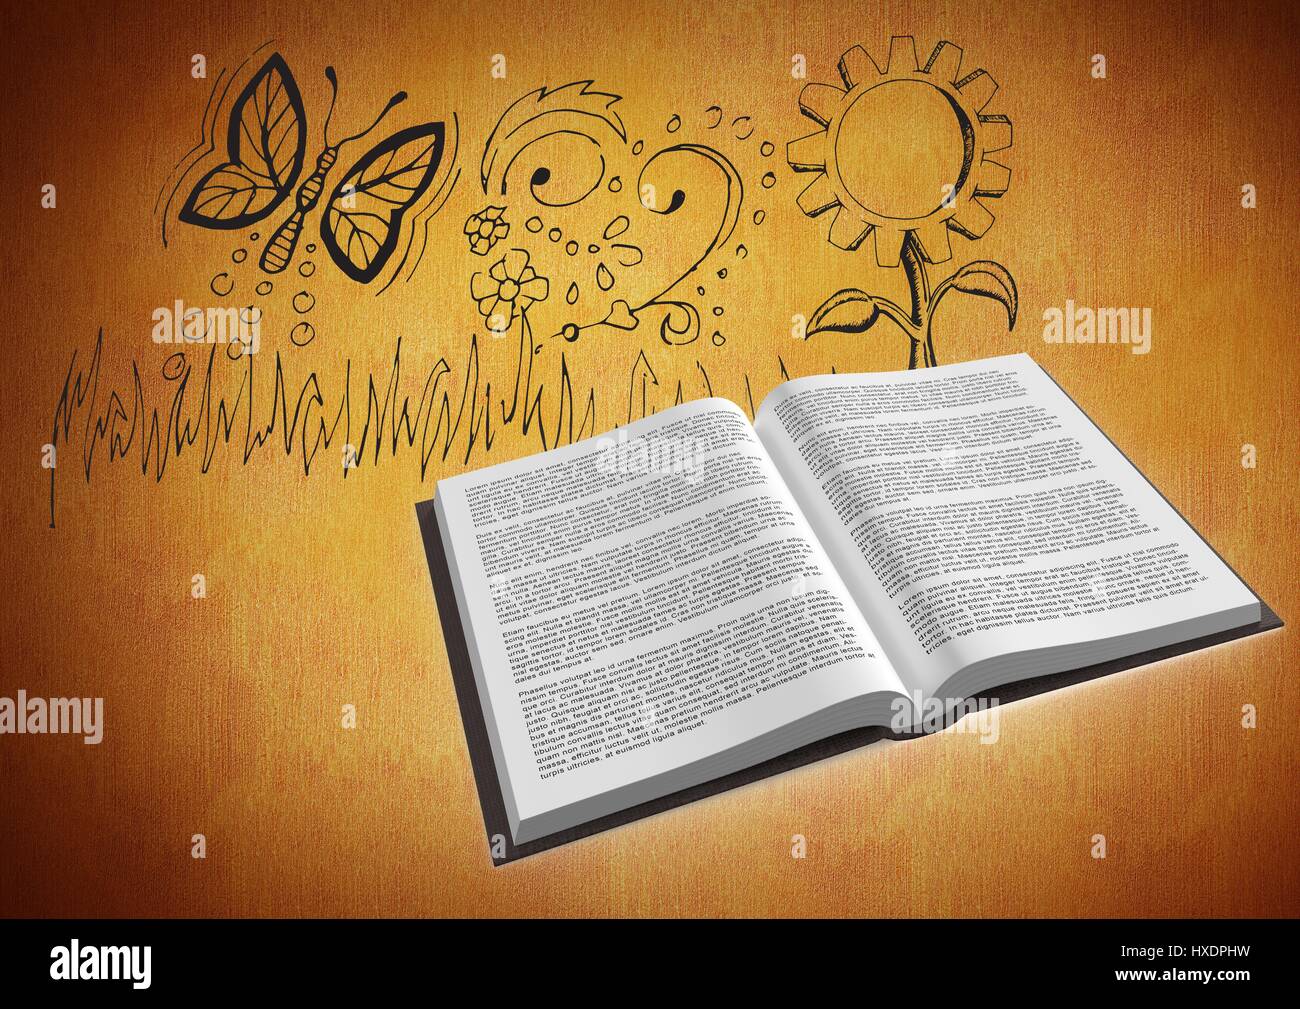 Digital composite of Book open against drawings of nature on orange background Stock Photo